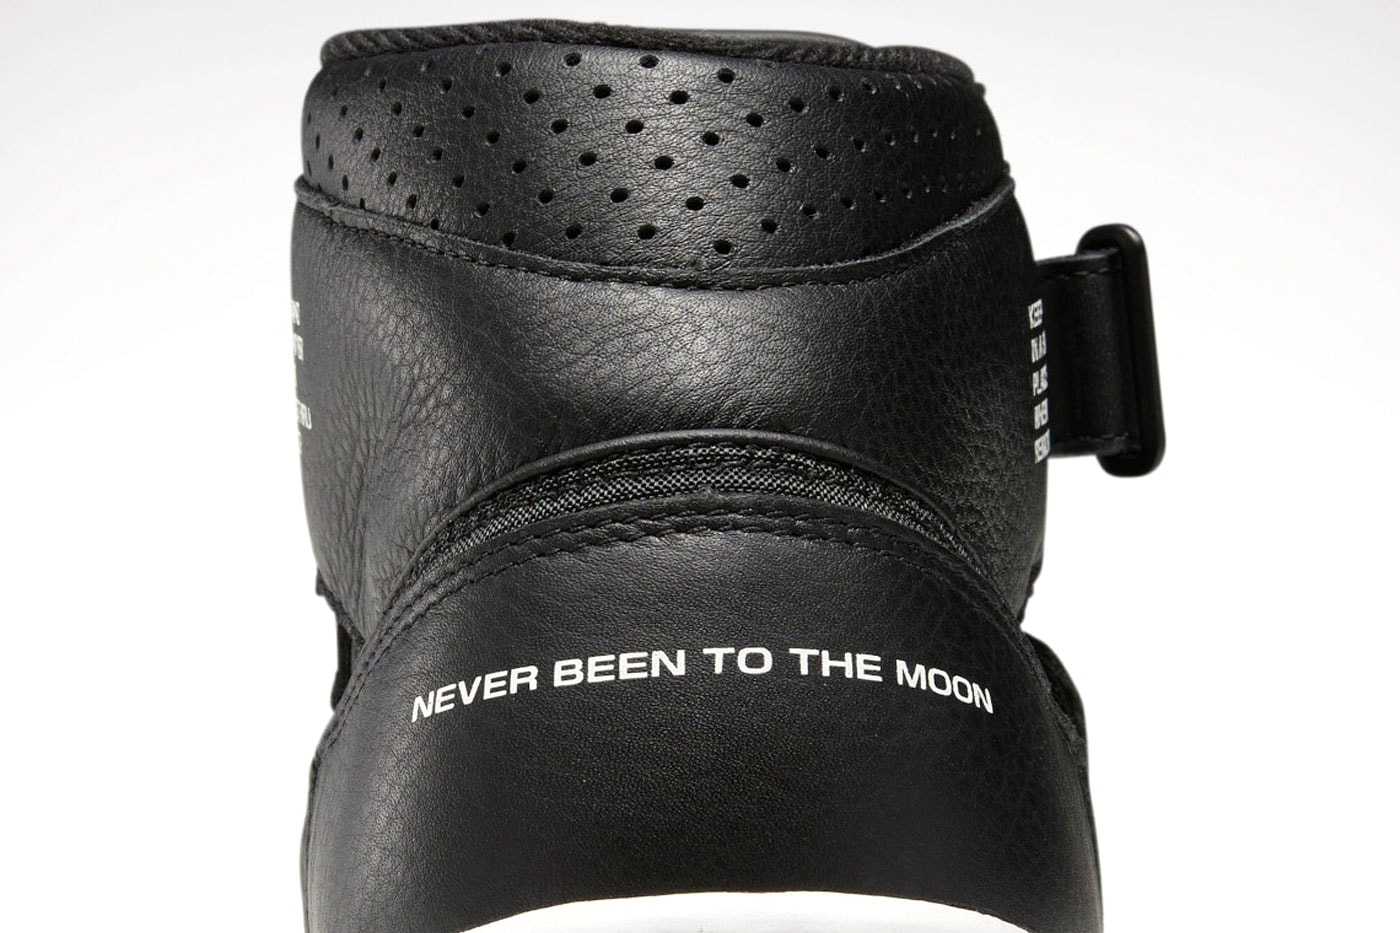 Mountain Research Reebok alien stomper 1986 film jurassic park japan KEEP STRAPPED TO HOLD FIRMLY NEVER BEEN TO THE MOON black white release info price